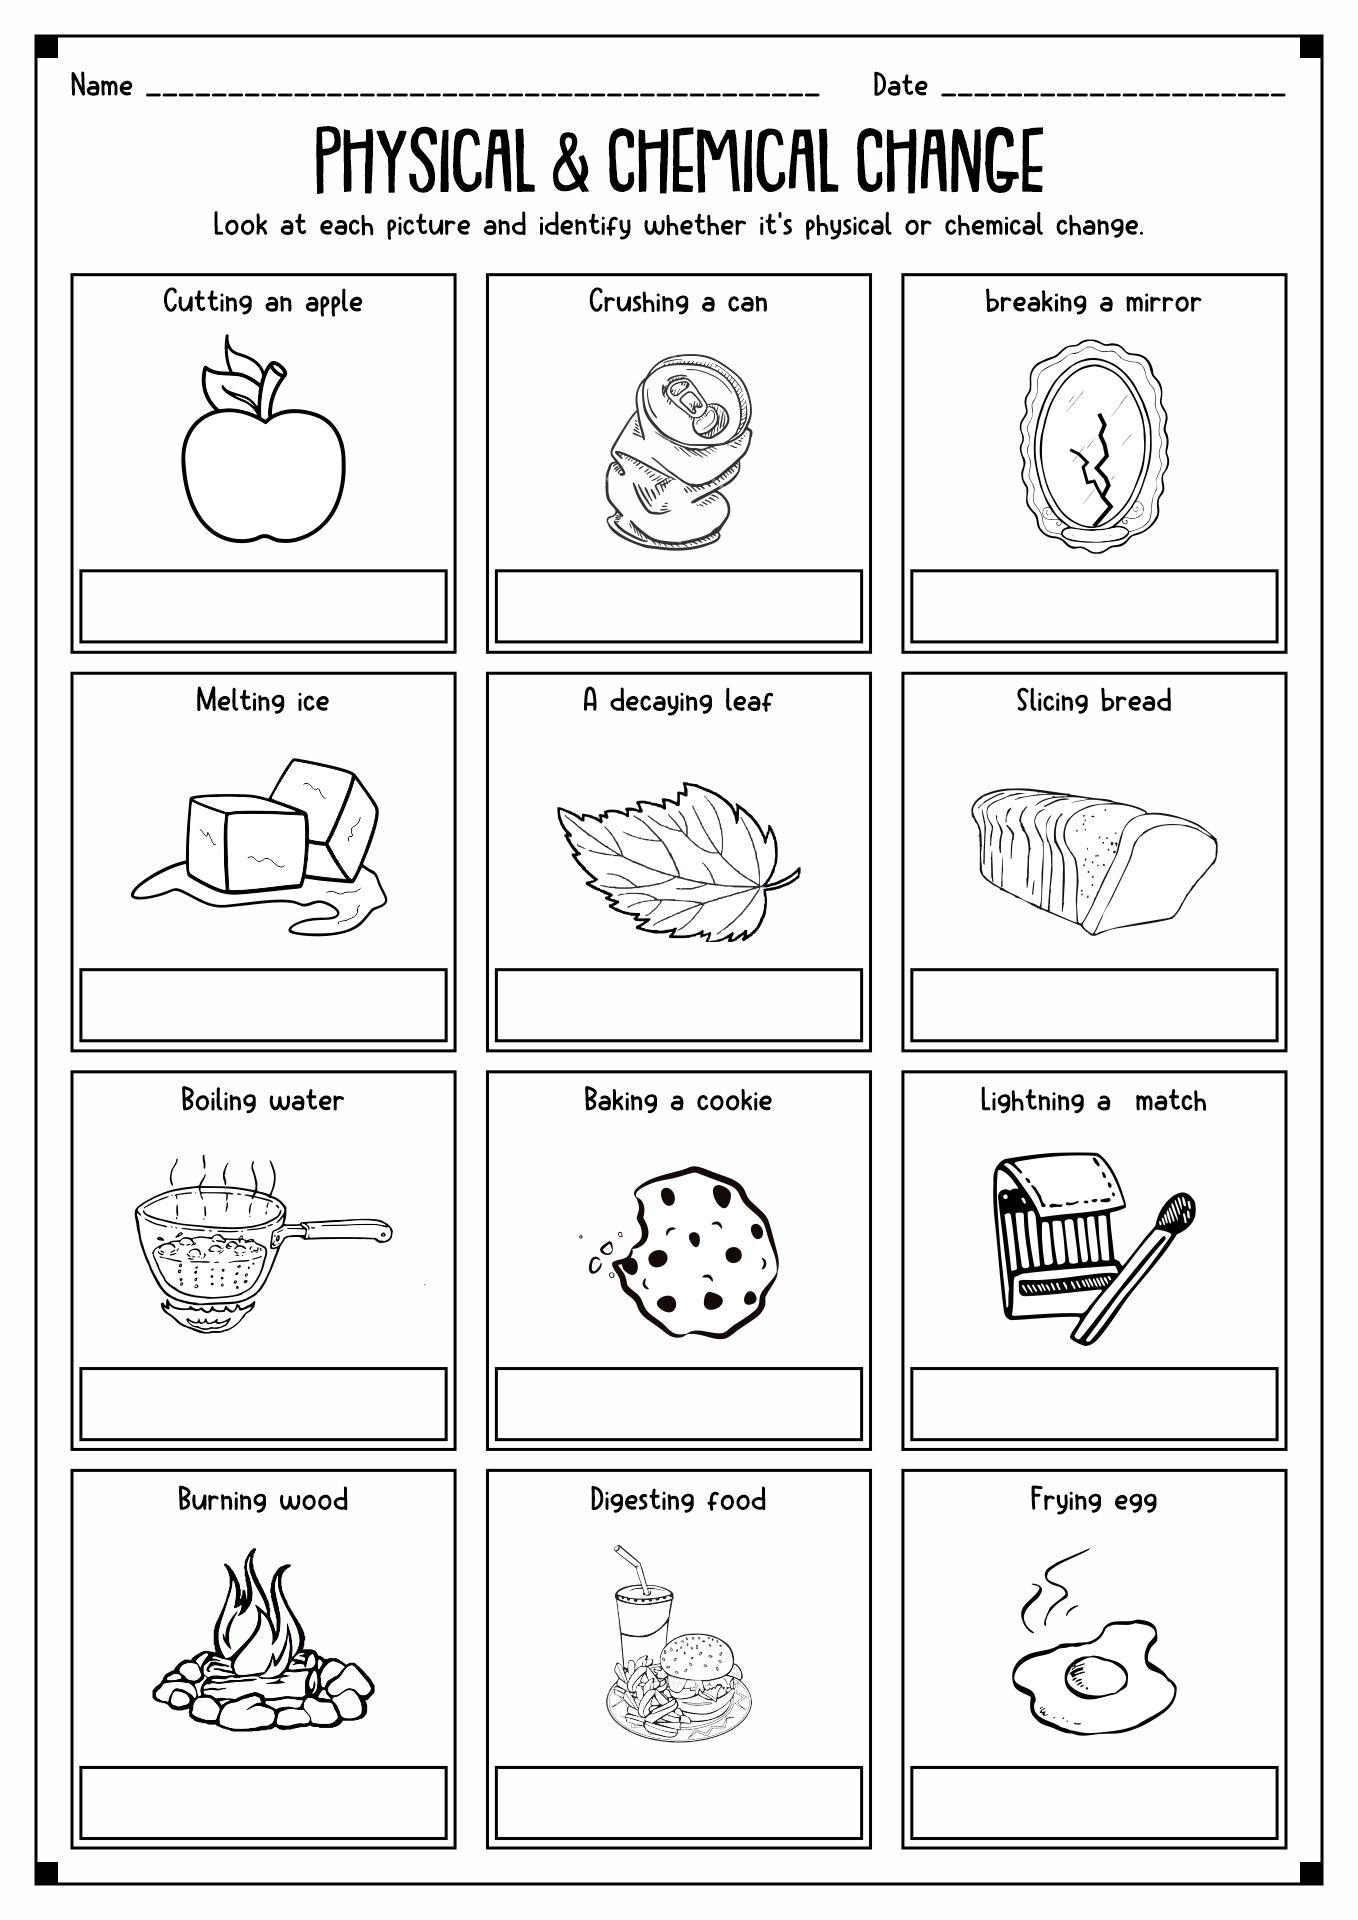 14-best-images-of-physical-changes-matter-worksheets-matter-physical